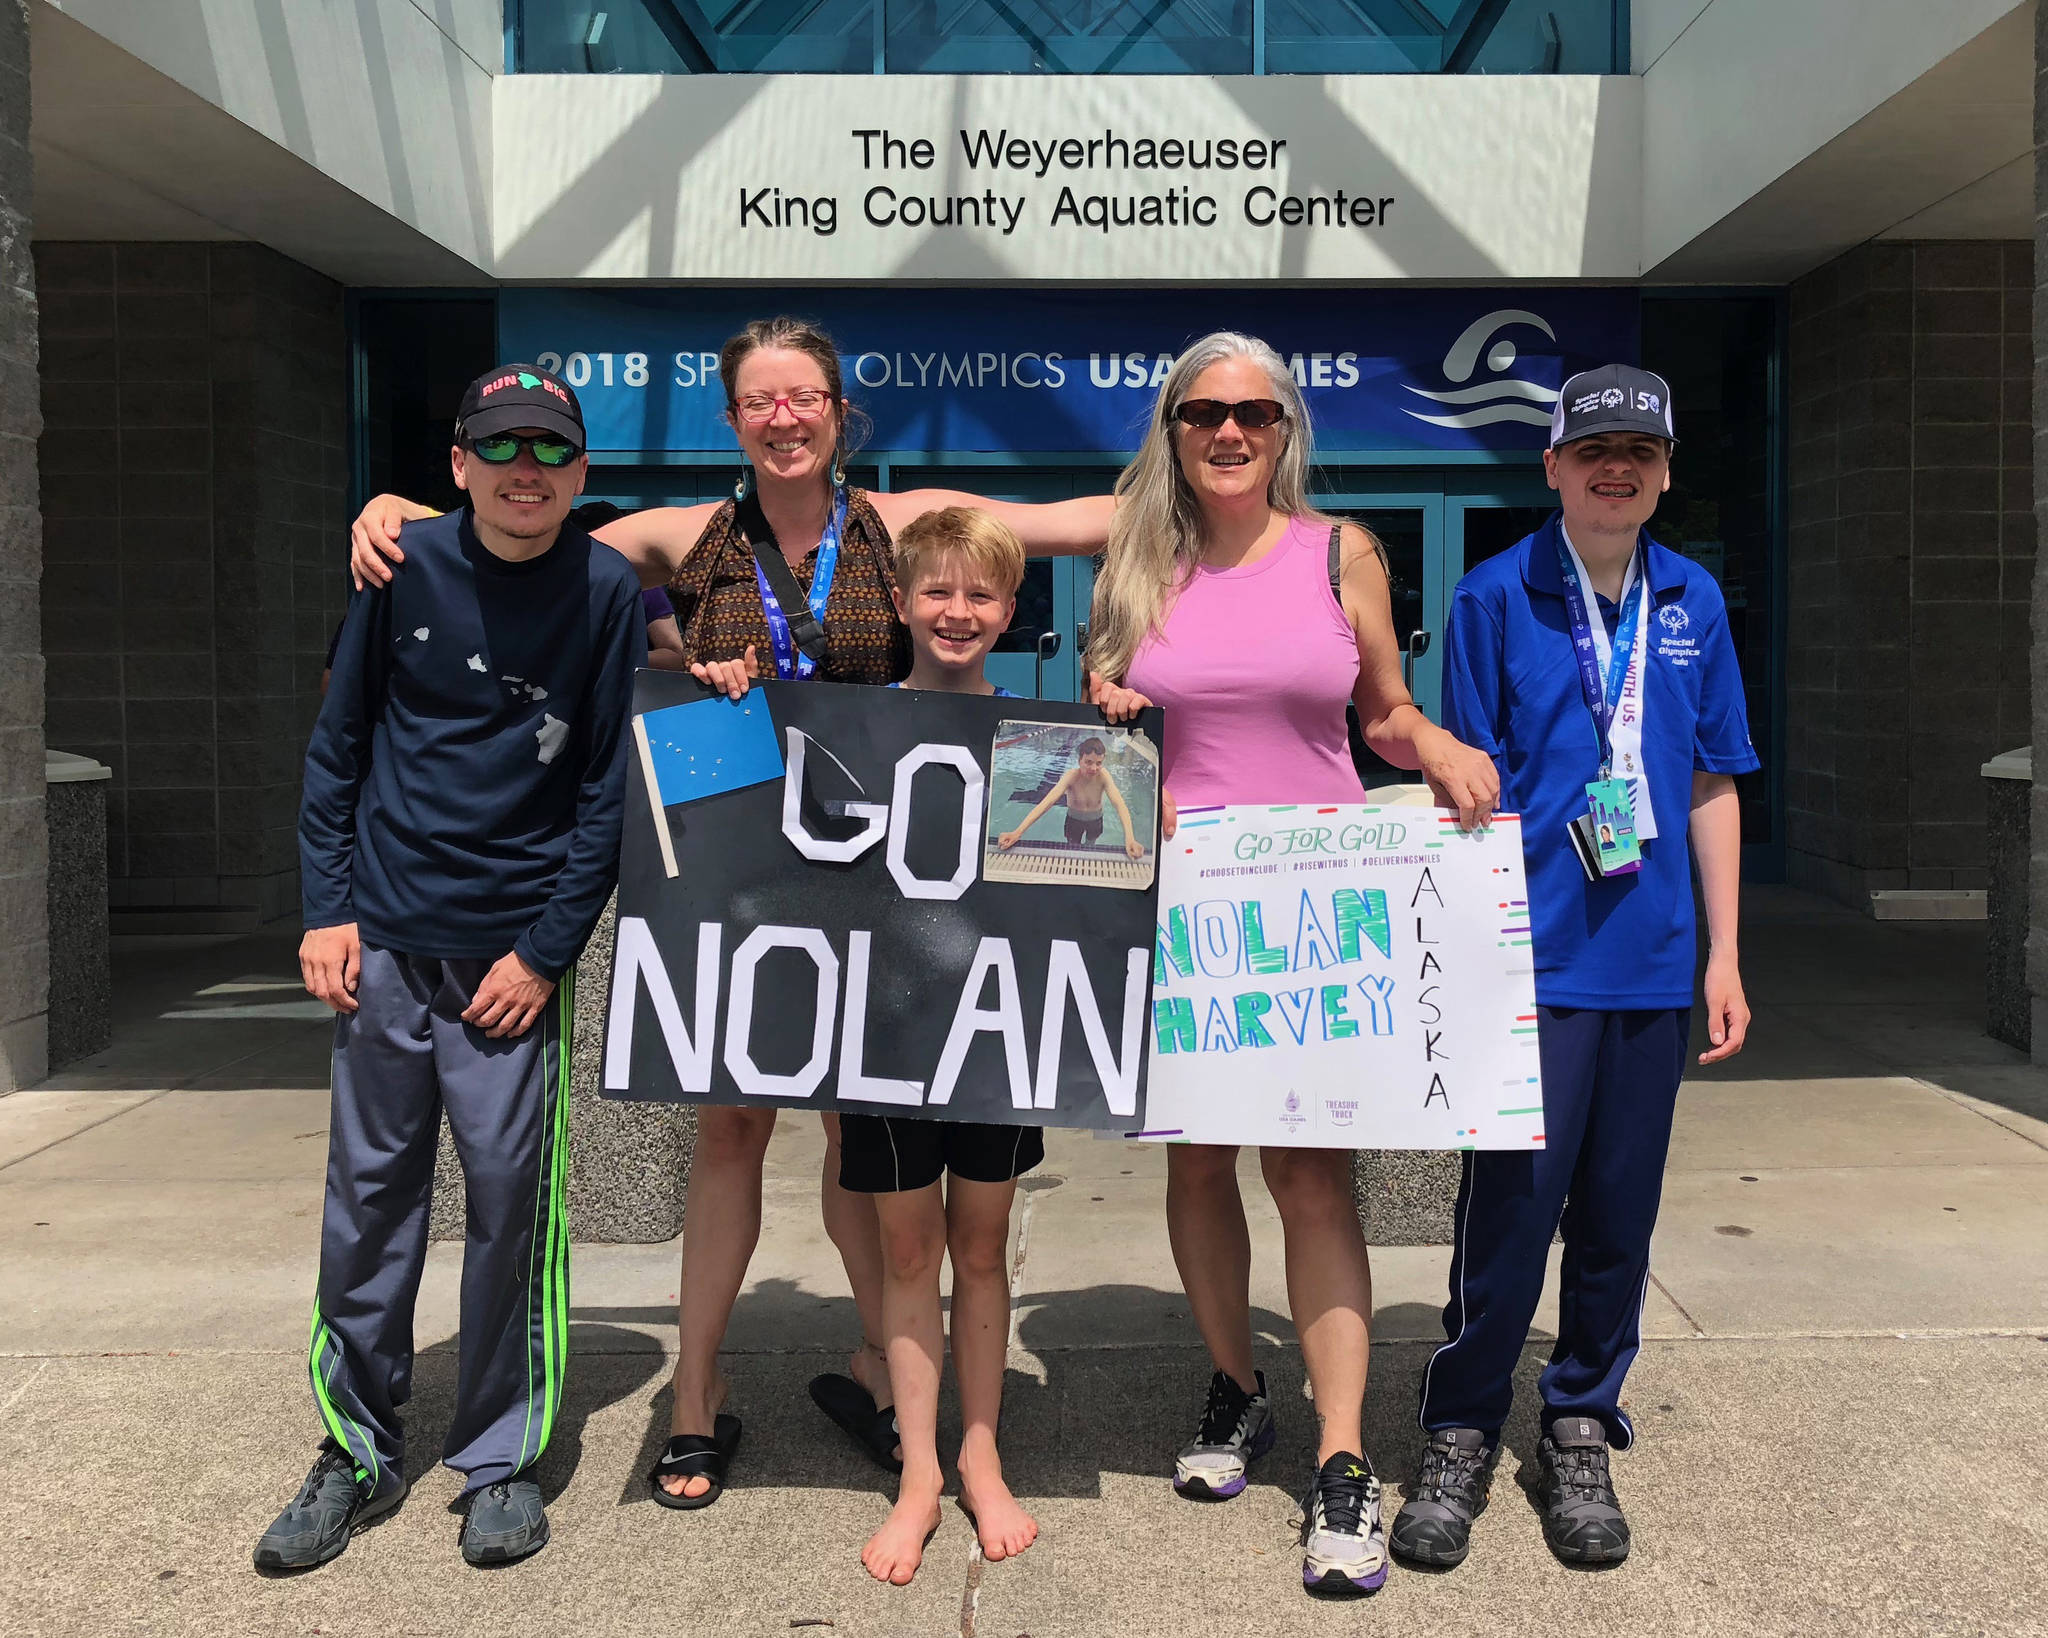 Nolan Harvey, far right, with (left to right) brother Ryan Harvey, friend Annie Geselle, friend Mattice Geselle and mom CJ Johnson outside the King County Aquatic Center, the site of the swimming events for the Special Olympics USA Games. (Courtesy Photo | CJ Johnson)